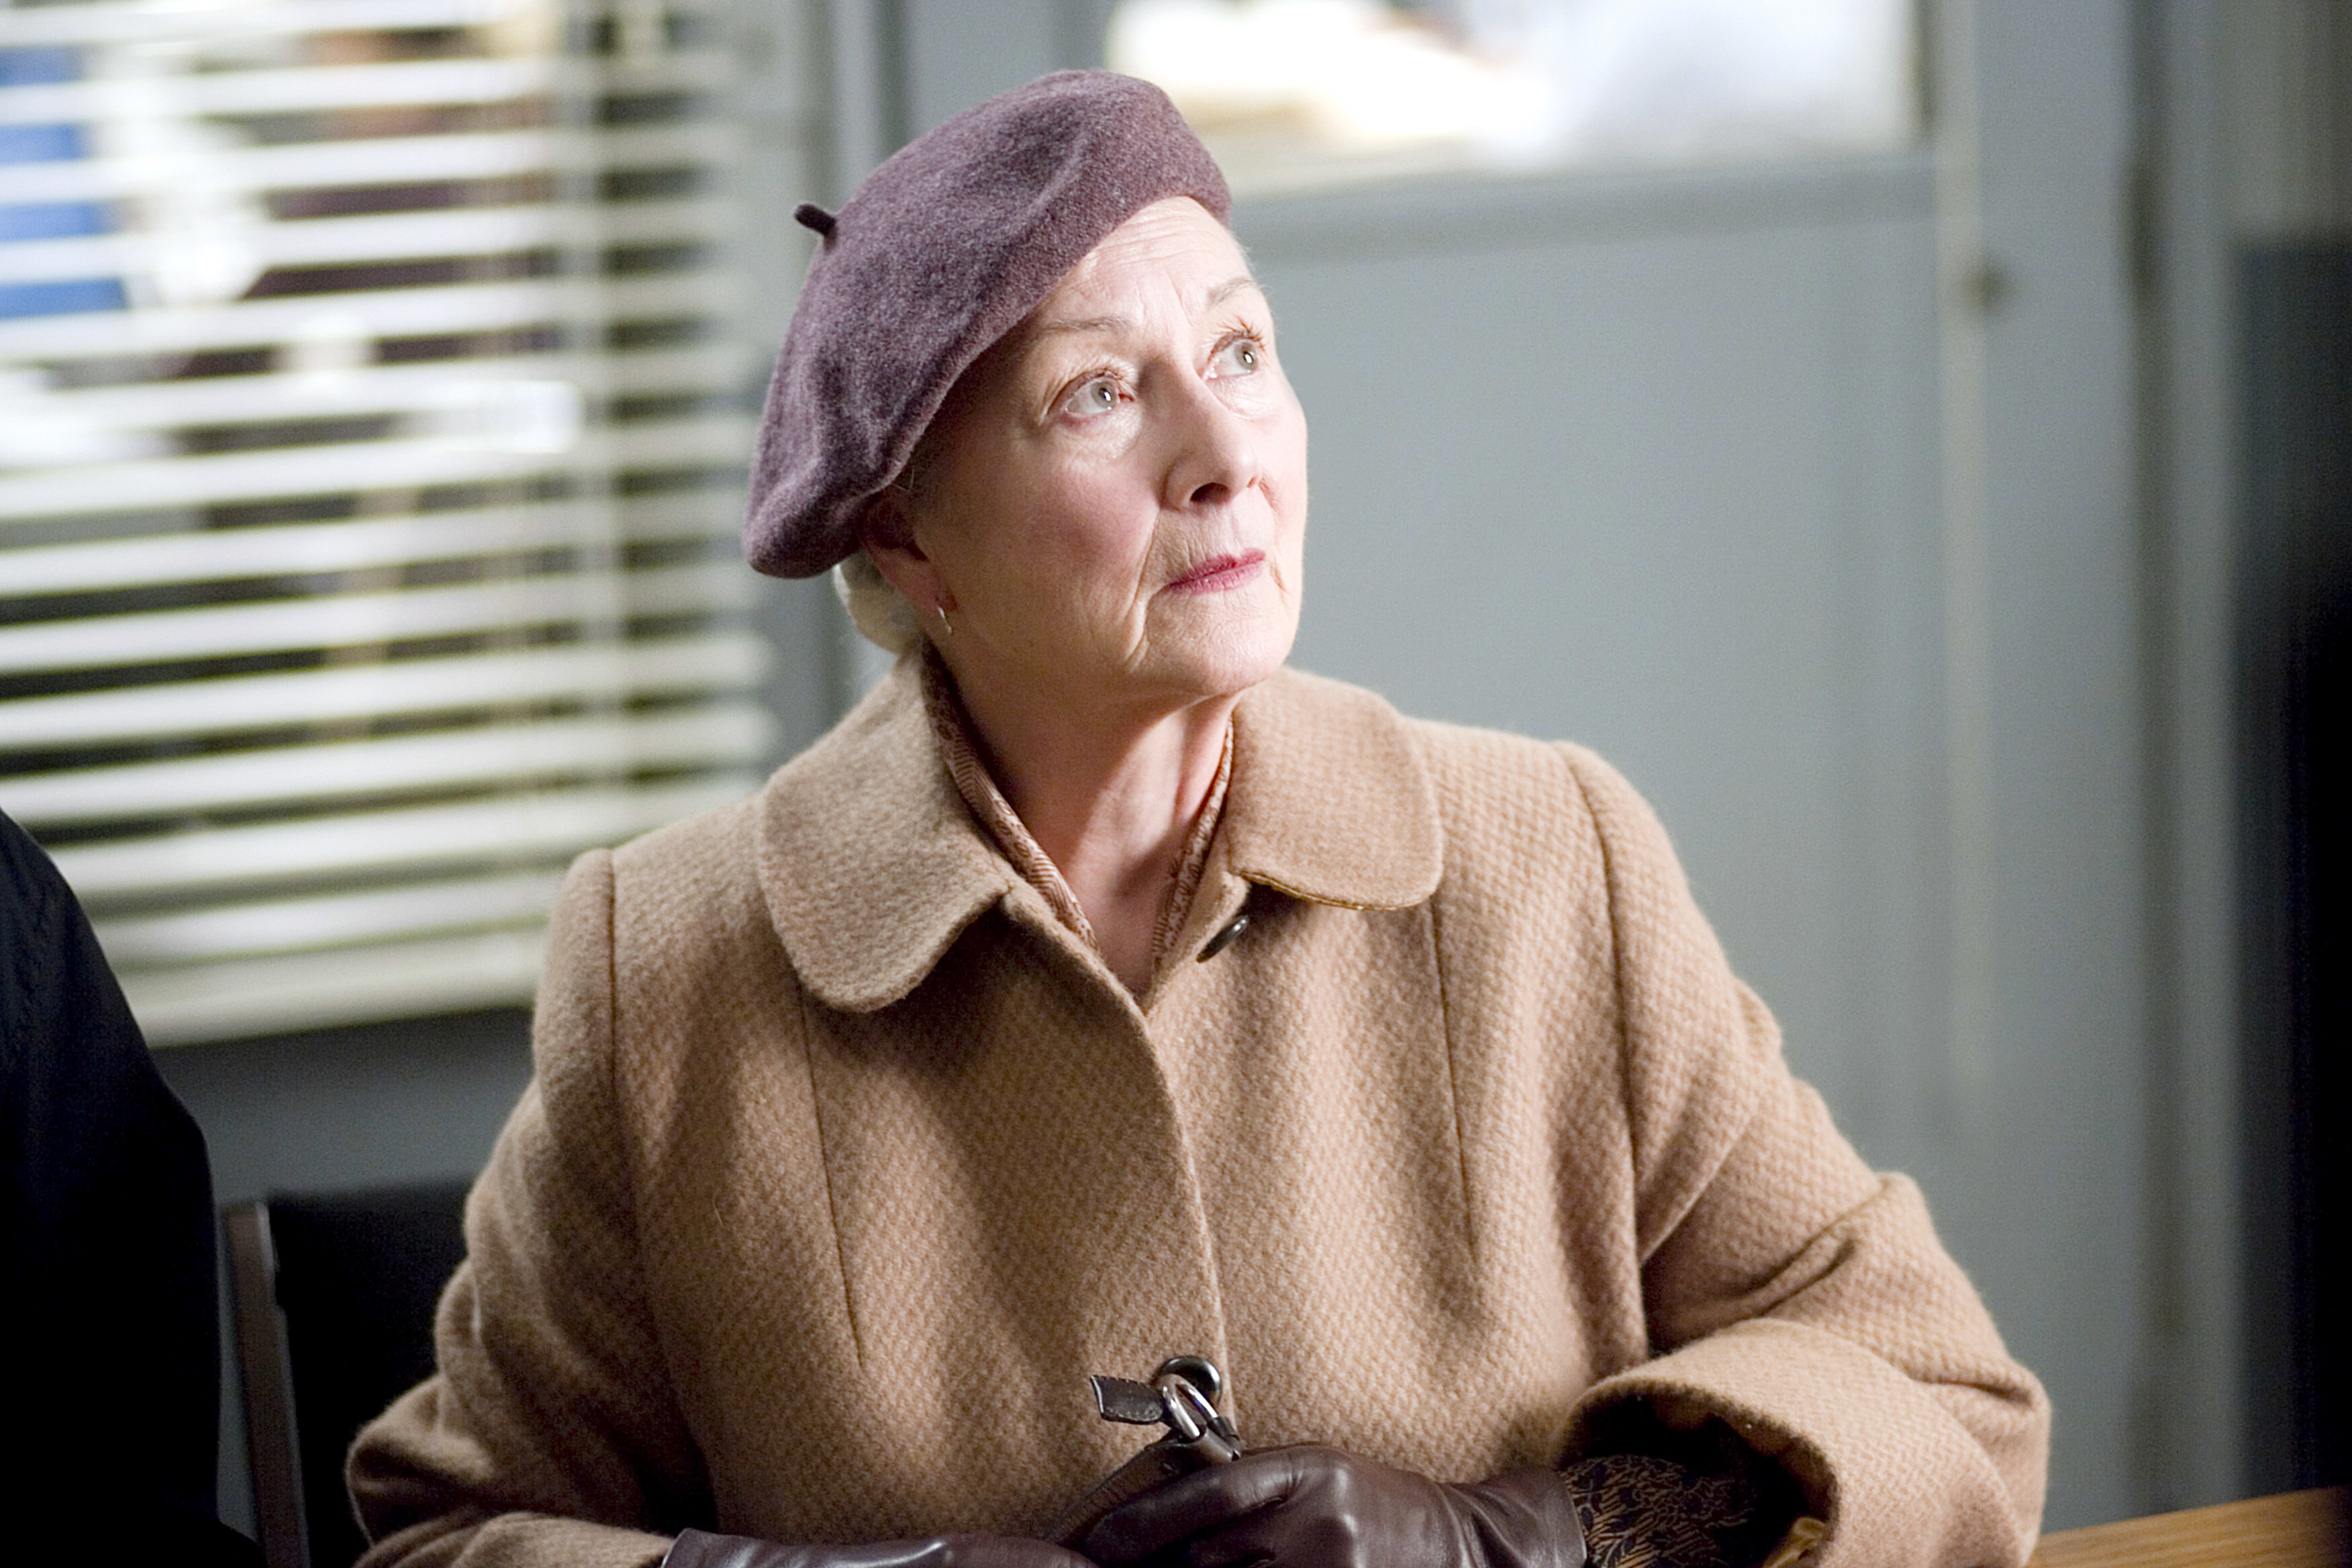 Rosemary Harris in a tan coat and purple hat looks upwards with a pensive expression